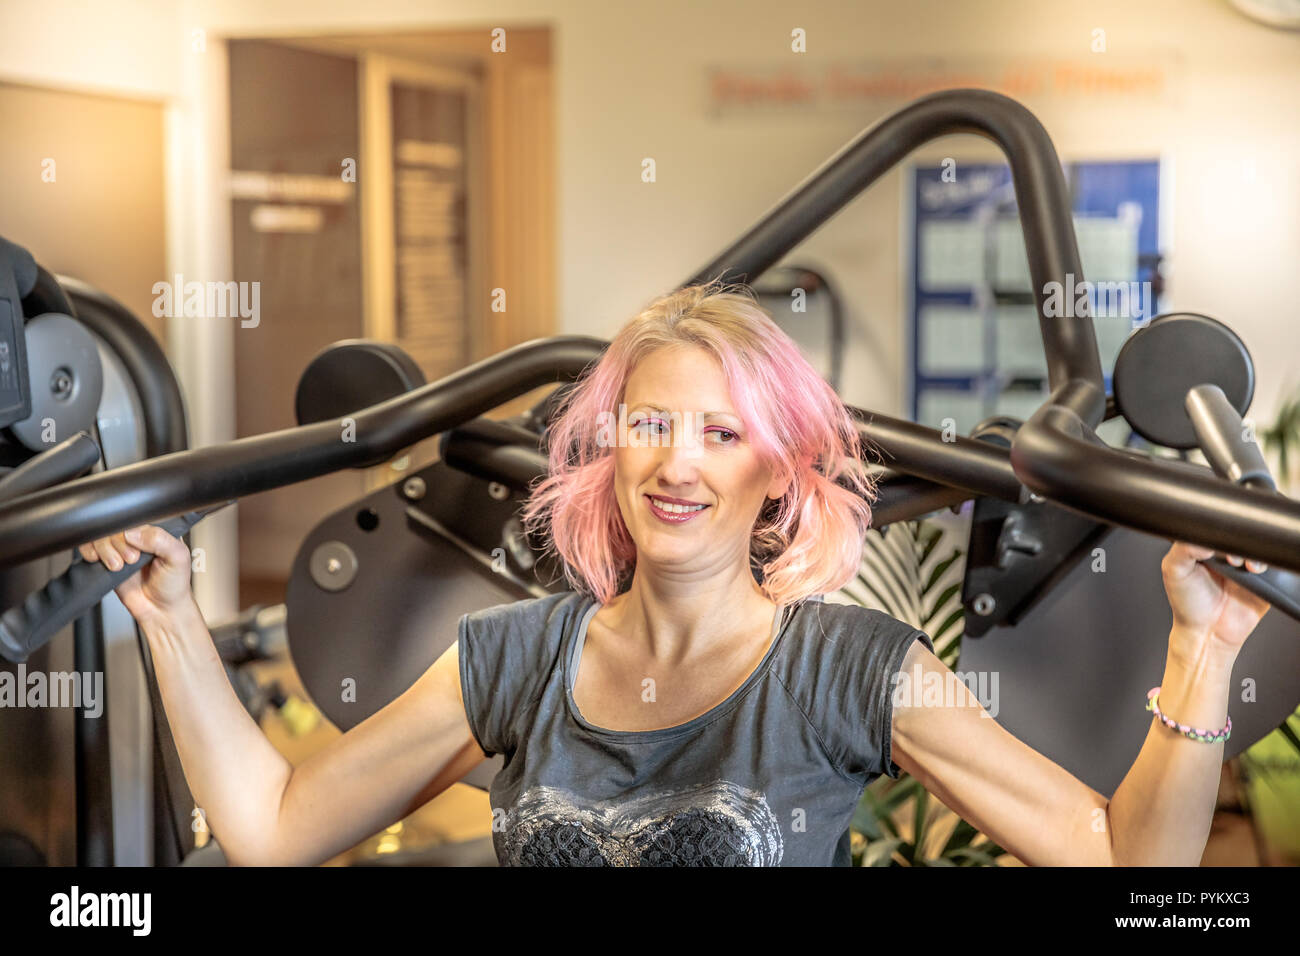 Portrait of fitness female athlete working on seated shoulder press machine. Training arms triceps biceps muscles in modern gym. Healthy lifestyle concept. Stock Photo